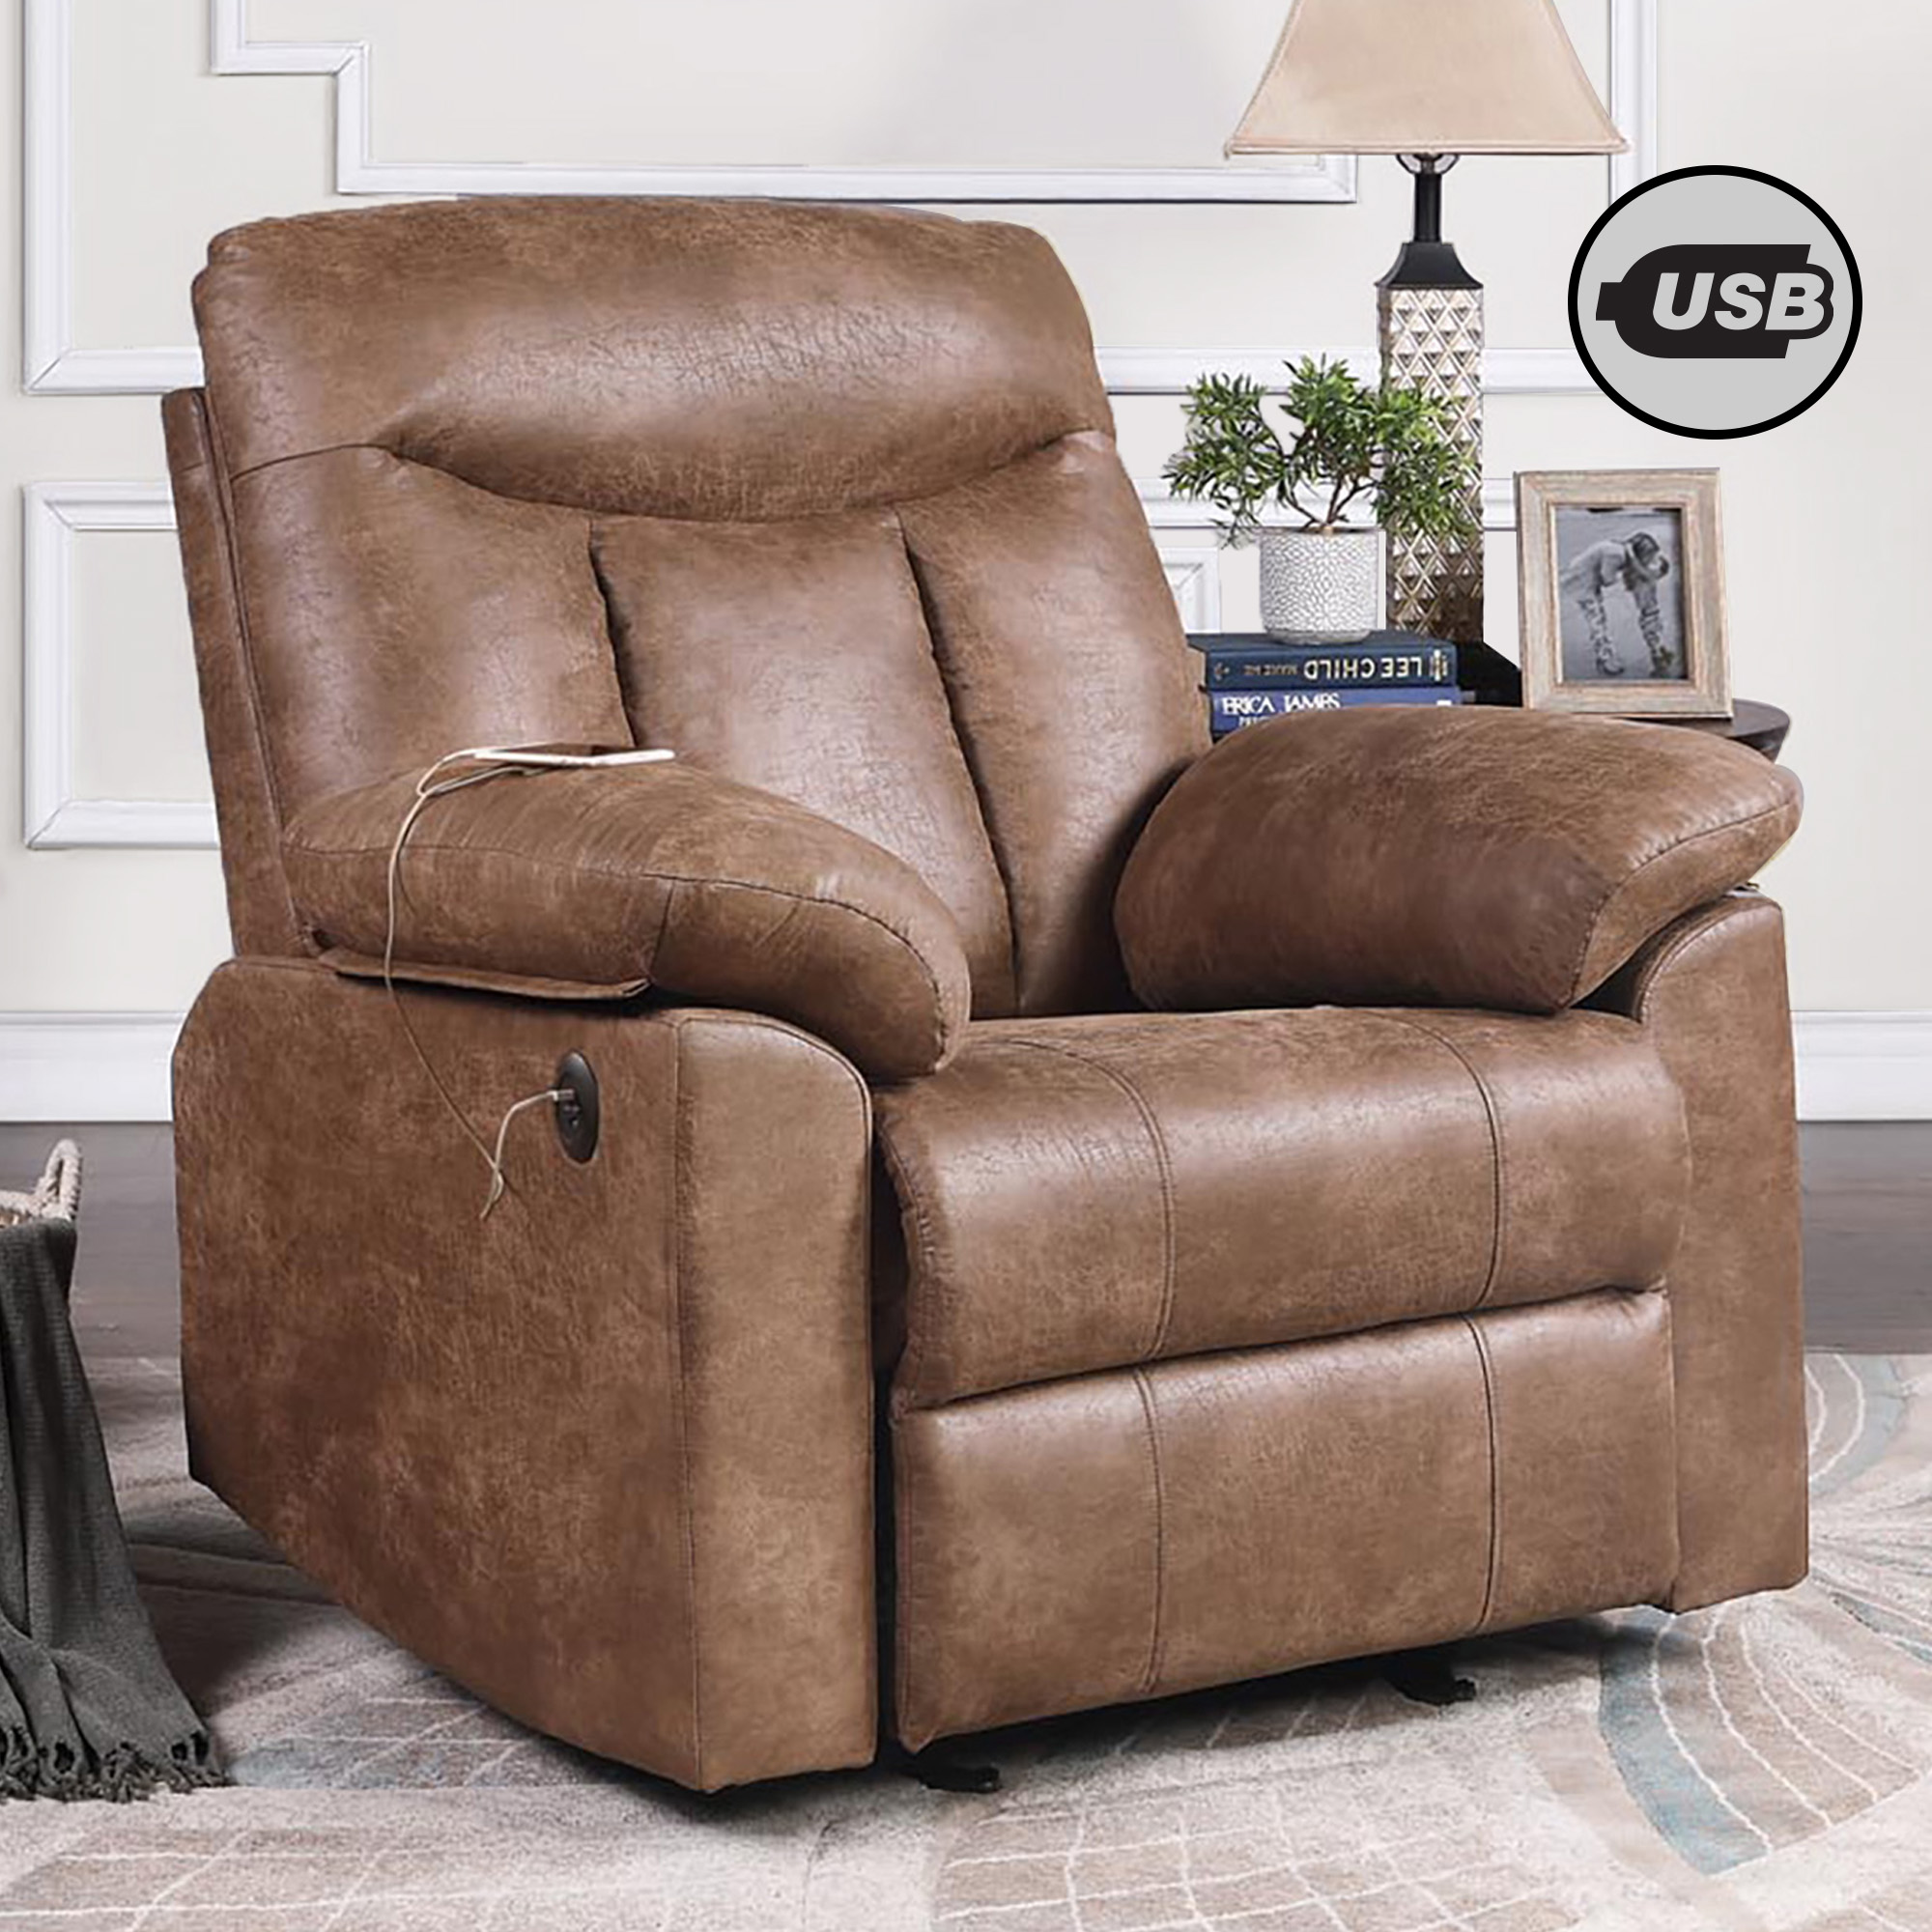 Becket Big and Tall Memory Foam Rocker Recliner W/USB Vintage Brown, Supports up to 500 lbs - image 1 of 10